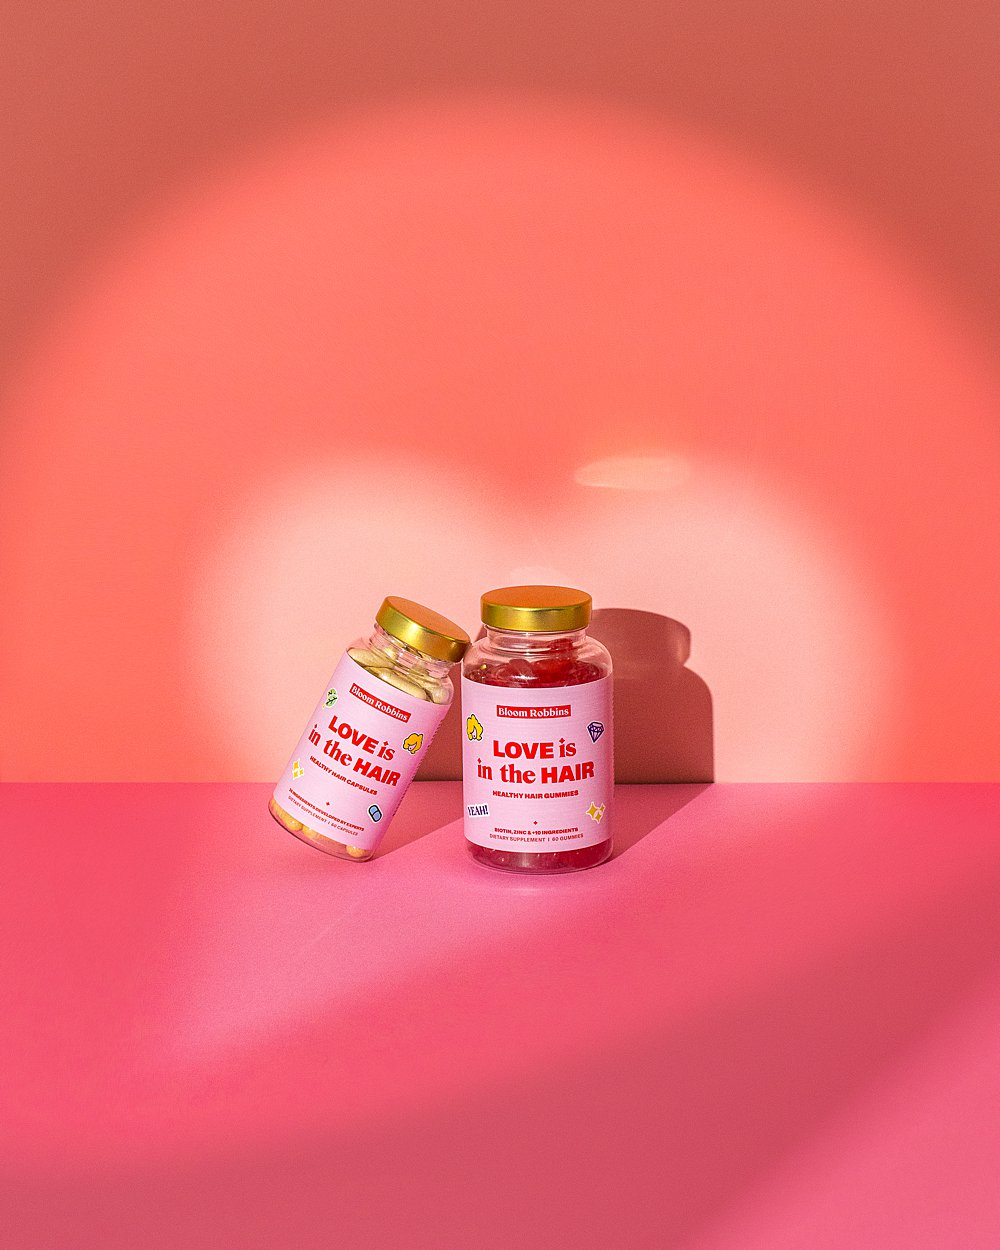 Colourful stills content creation for Bloom Robbins vitamins. Styled health product stills photography by HIYA MARIANNE.